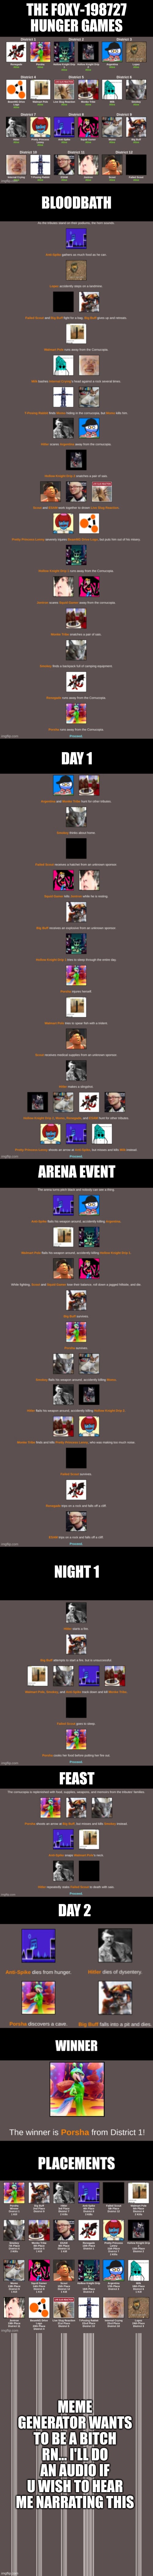 I'll put the audio link in the comments if u guys wanna hear | THE FOXY-198727 HUNGER GAMES; BLOODBATH; DAY 1; ARENA EVENT; NIGHT 1; FEAST; DAY 2; MEME GENERATOR WANTS TO BE A BITCH RN... I'LL DO AN AUDIO IF U WISH TO HEAR ME NARRATING THIS | image tagged in blck | made w/ Imgflip meme maker